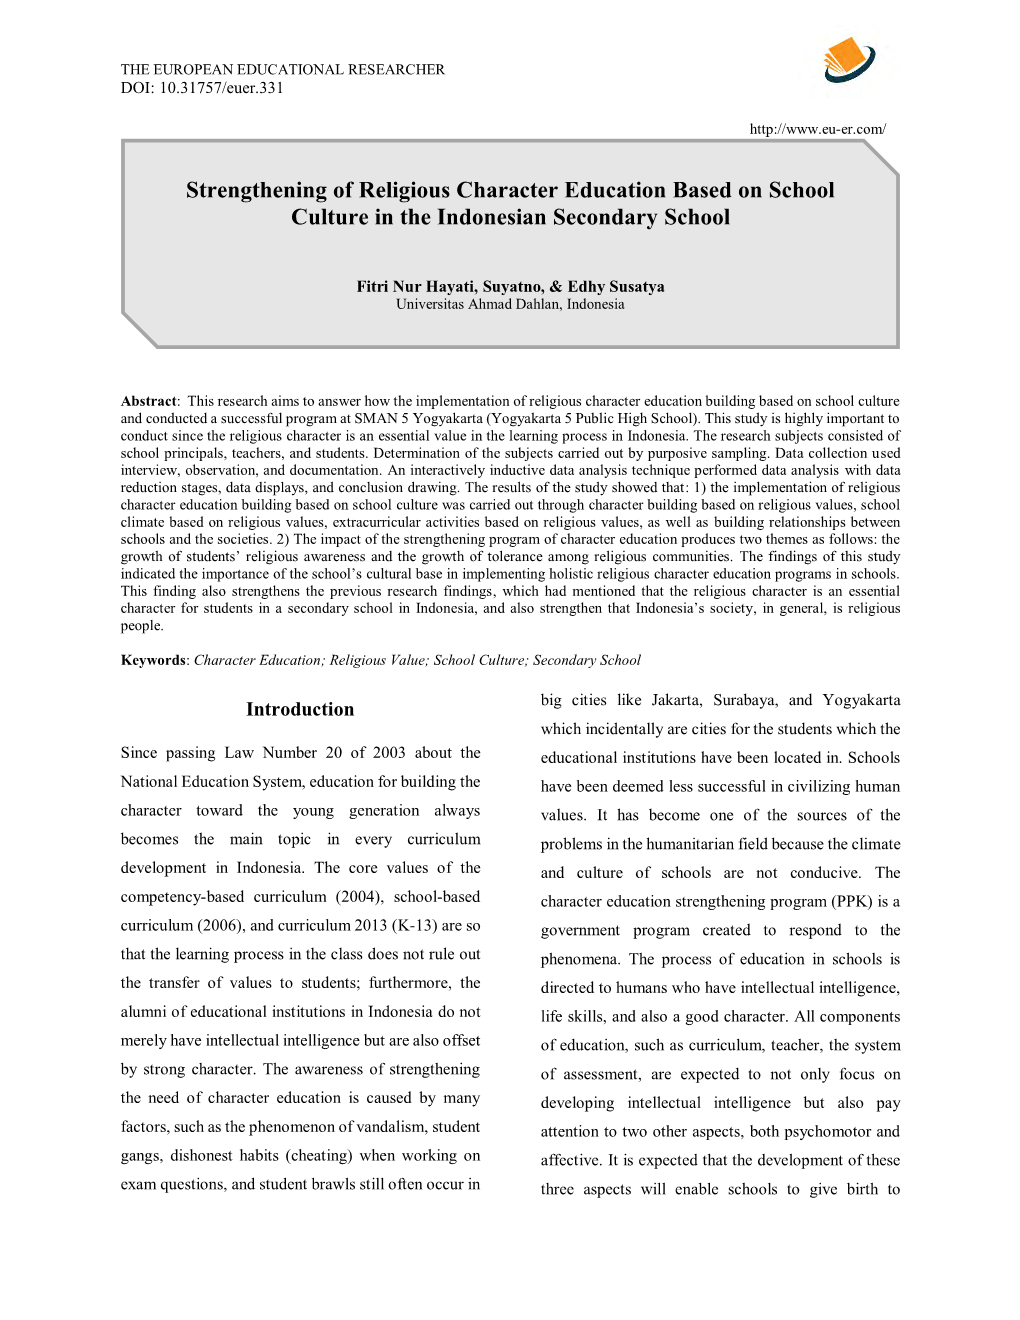 Strengthening of Religious Character Education Based on School Culture in the Indonesian Secondary School